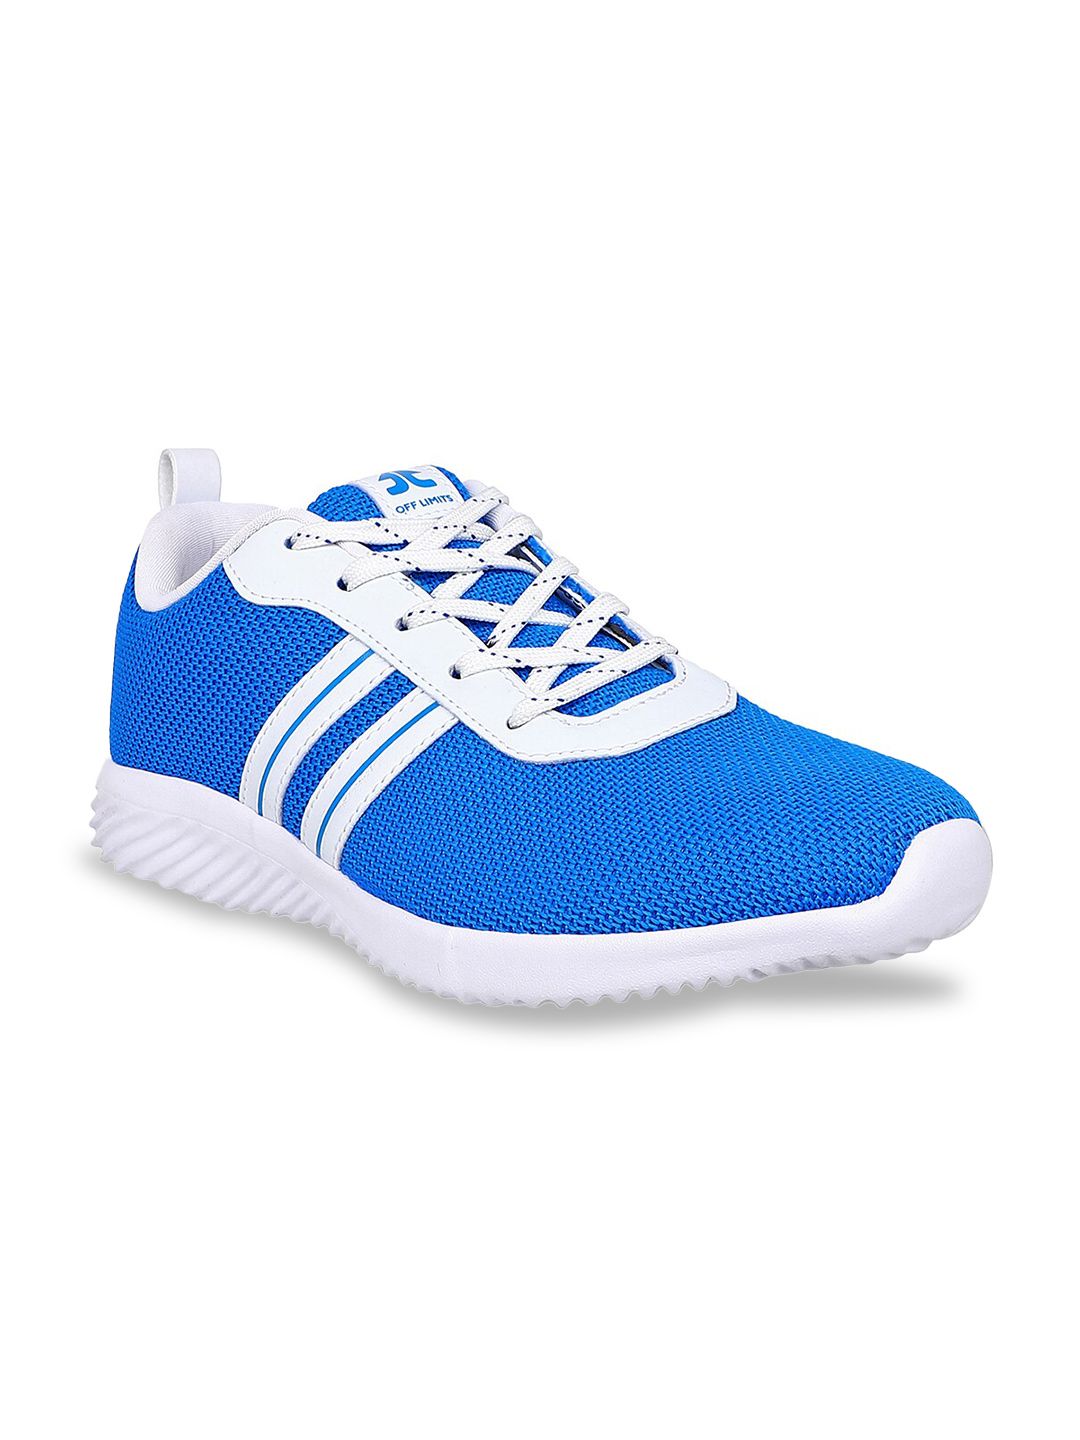 OFF LIMITS Women Blue Mesh Running Non-Marking Shoes Price in India